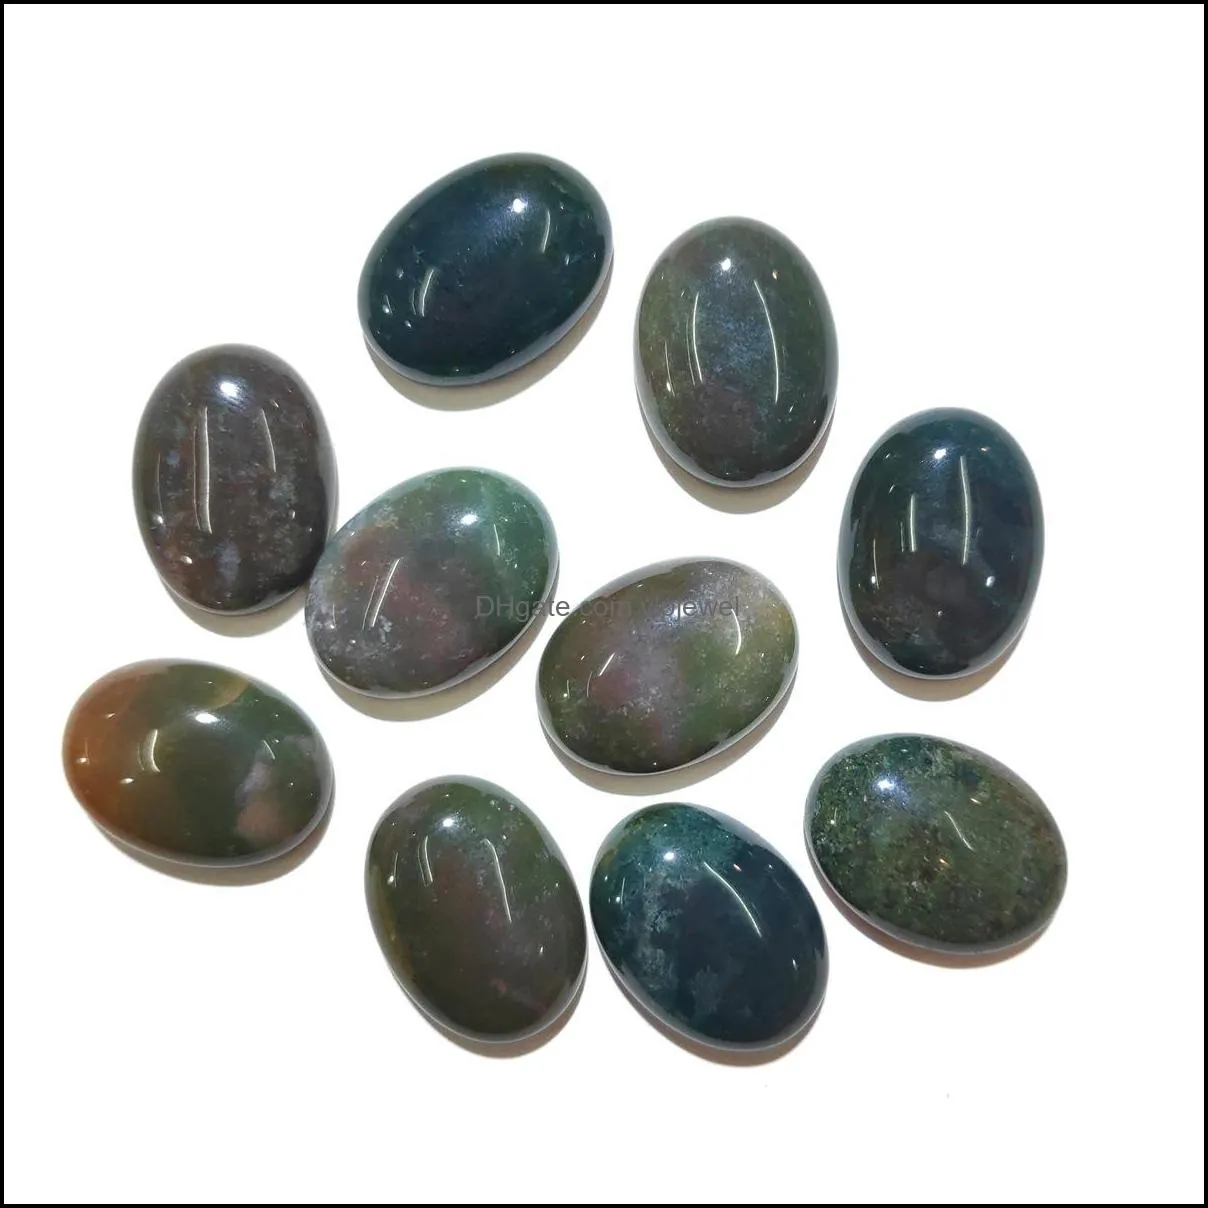 Natural Snowflake Oval Flat Back Gemstone Cabochons Healing Chakra Crystal Stone Bead Cab Covers No Hole for Jewelry Craft Making